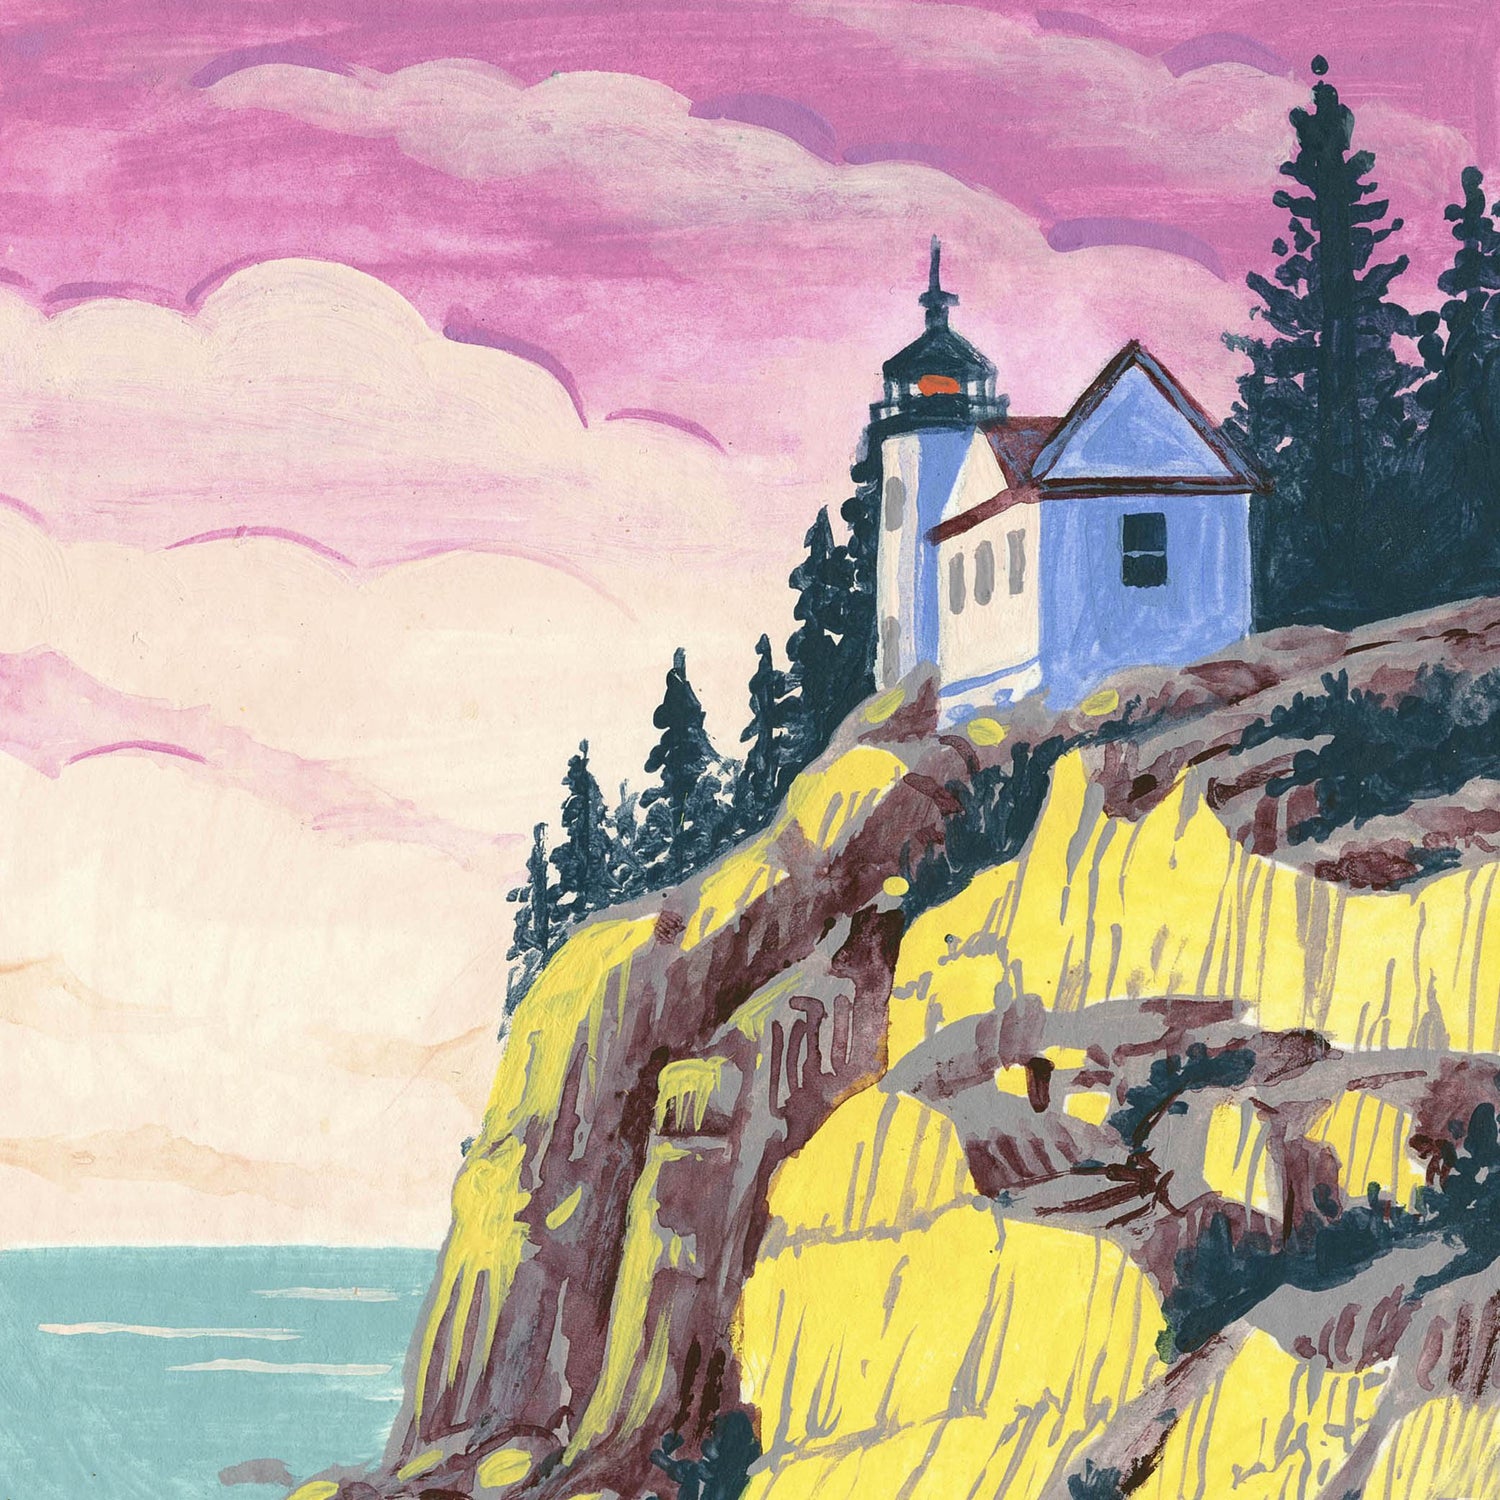 Acadia National Park art detail located on Mount Desert Island in Maine; Bass Harbor Head lighthouse at sunset illustration by Angela Staehling